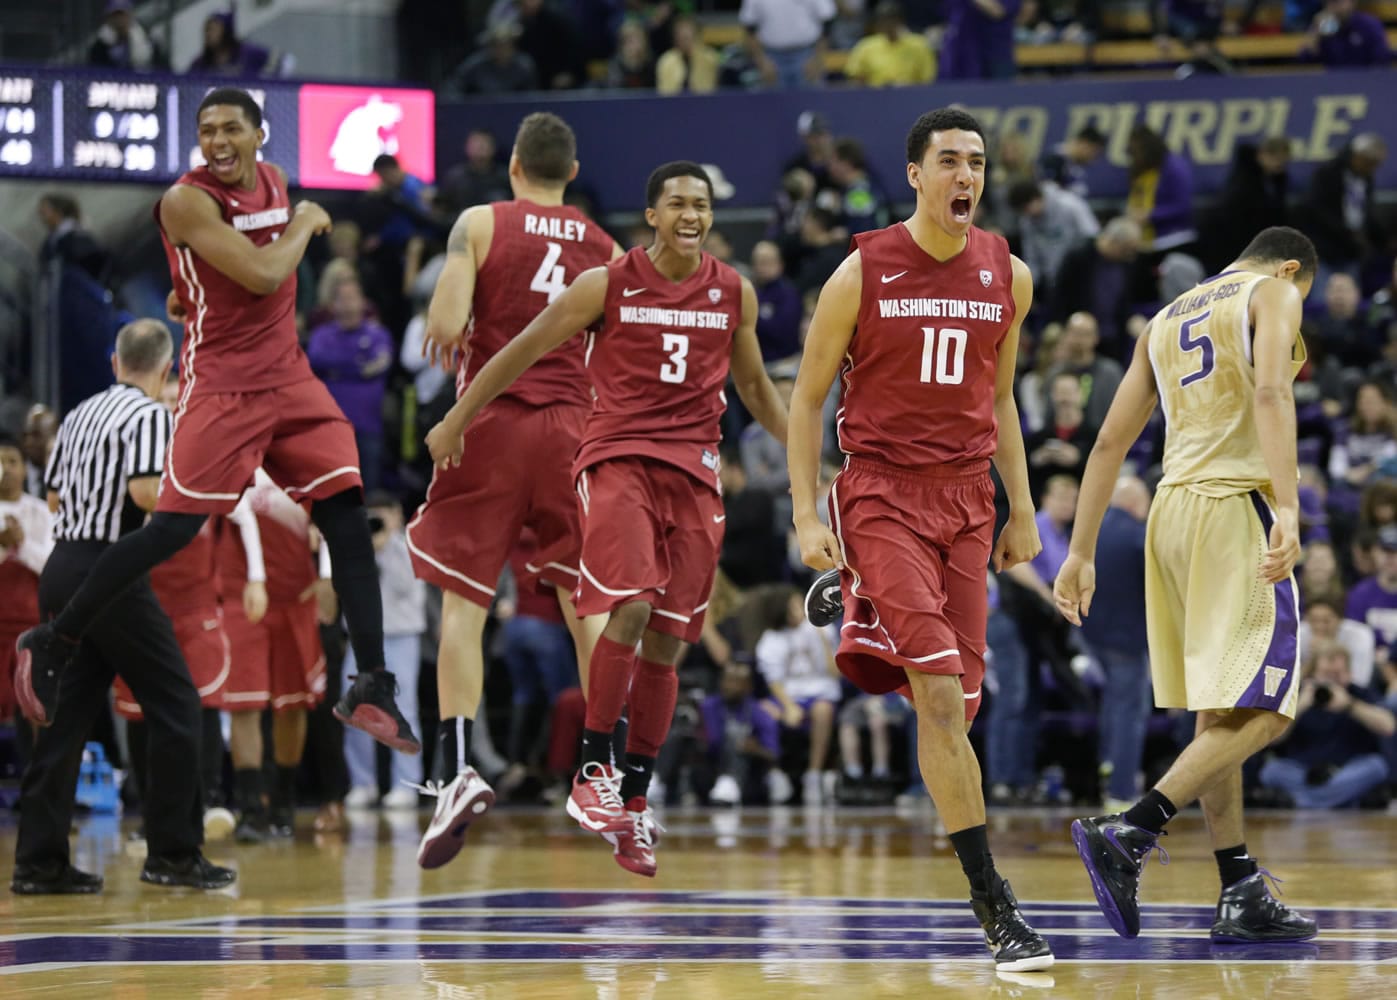 Washington State players Dexter Kernich-Drew (10) Ny Redding (3), Jordan Railey (4) and Jackie Davis, left, celebrate as Washington's Nigel Williams-Goss (5) walks off the court after the Cougars beat the Huskies 80-77 Saturday at Seattle.